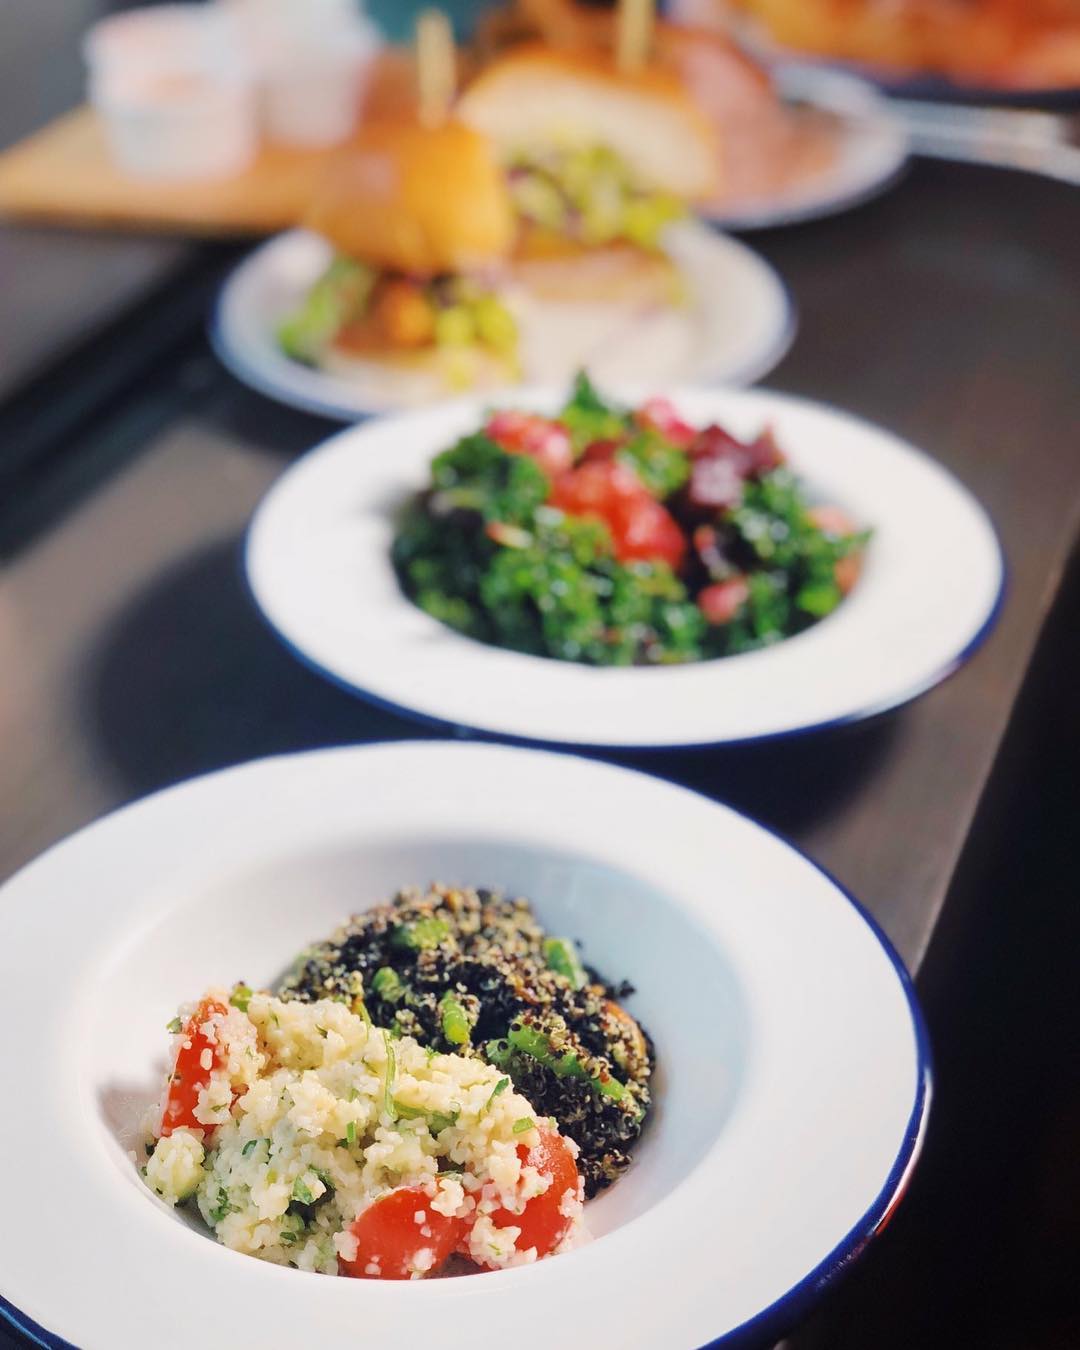 The superfood salads at Little Birdy